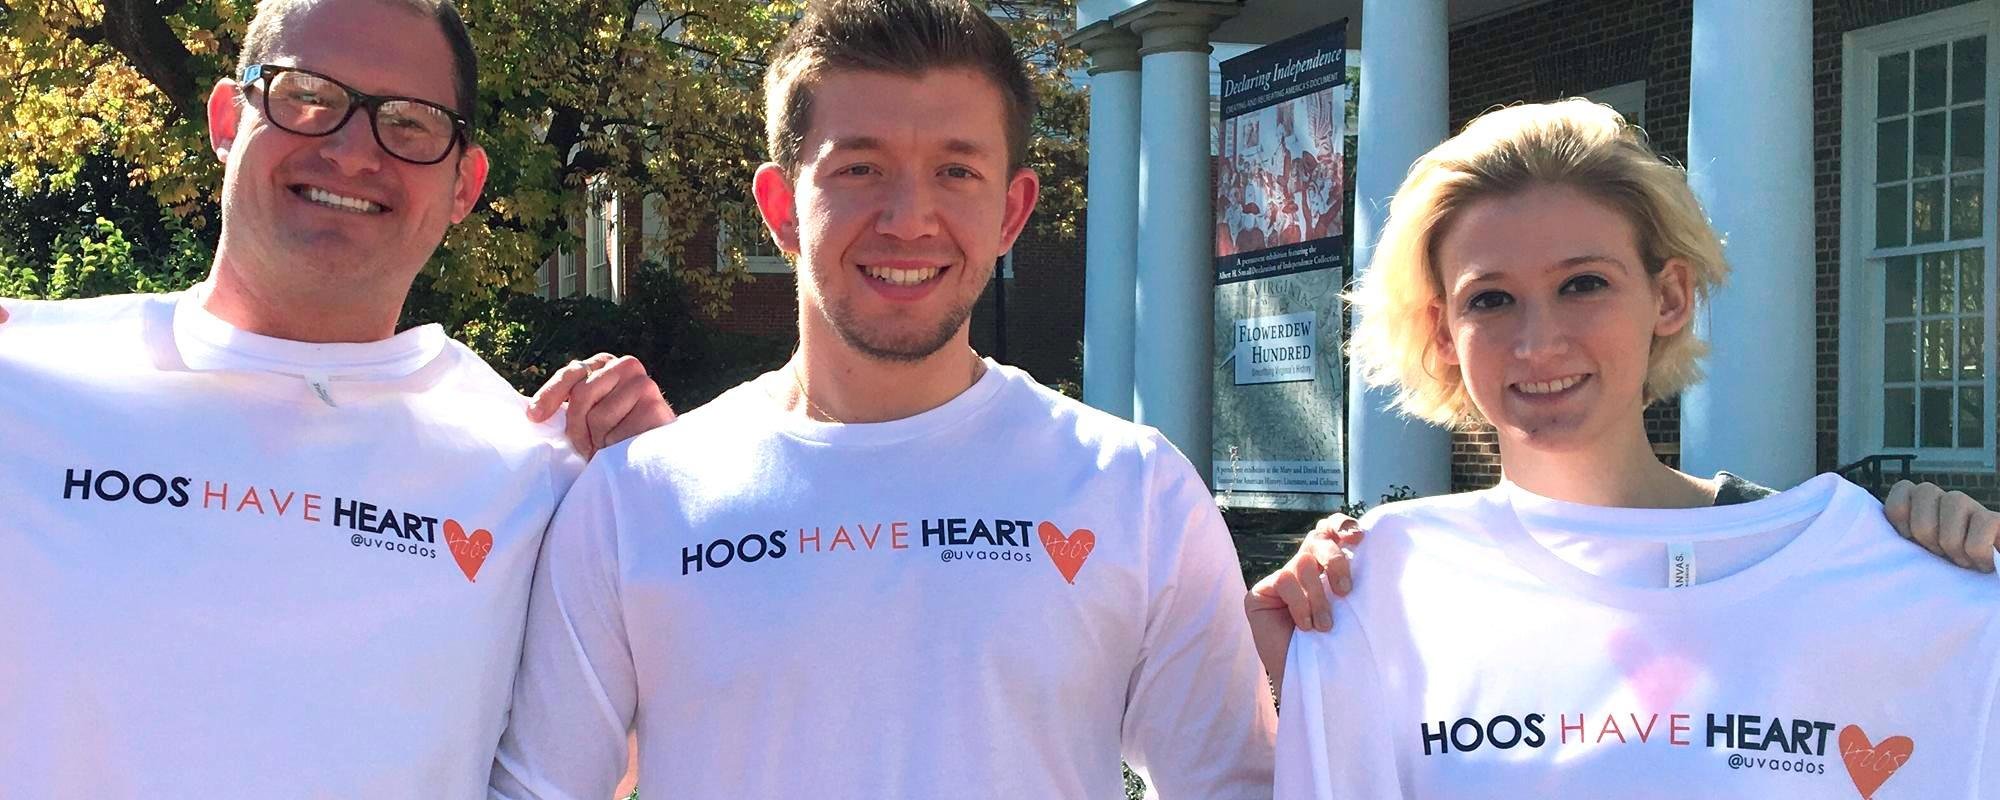 Hoos Have Heart campaign